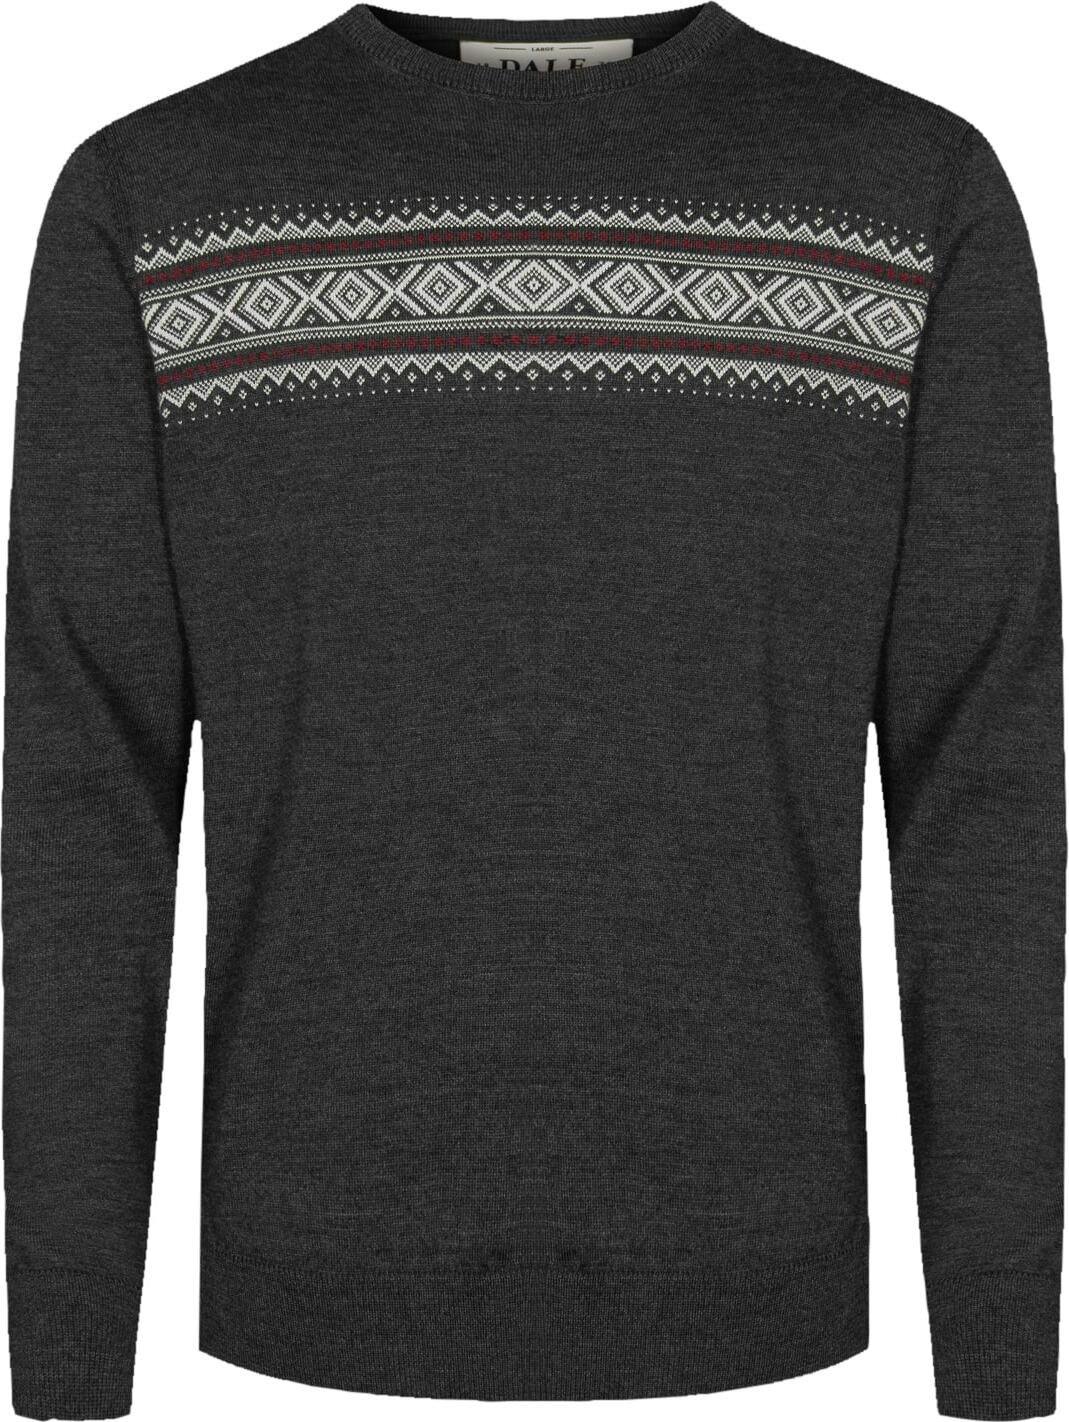 Product image for Sverre Sweater - Men's